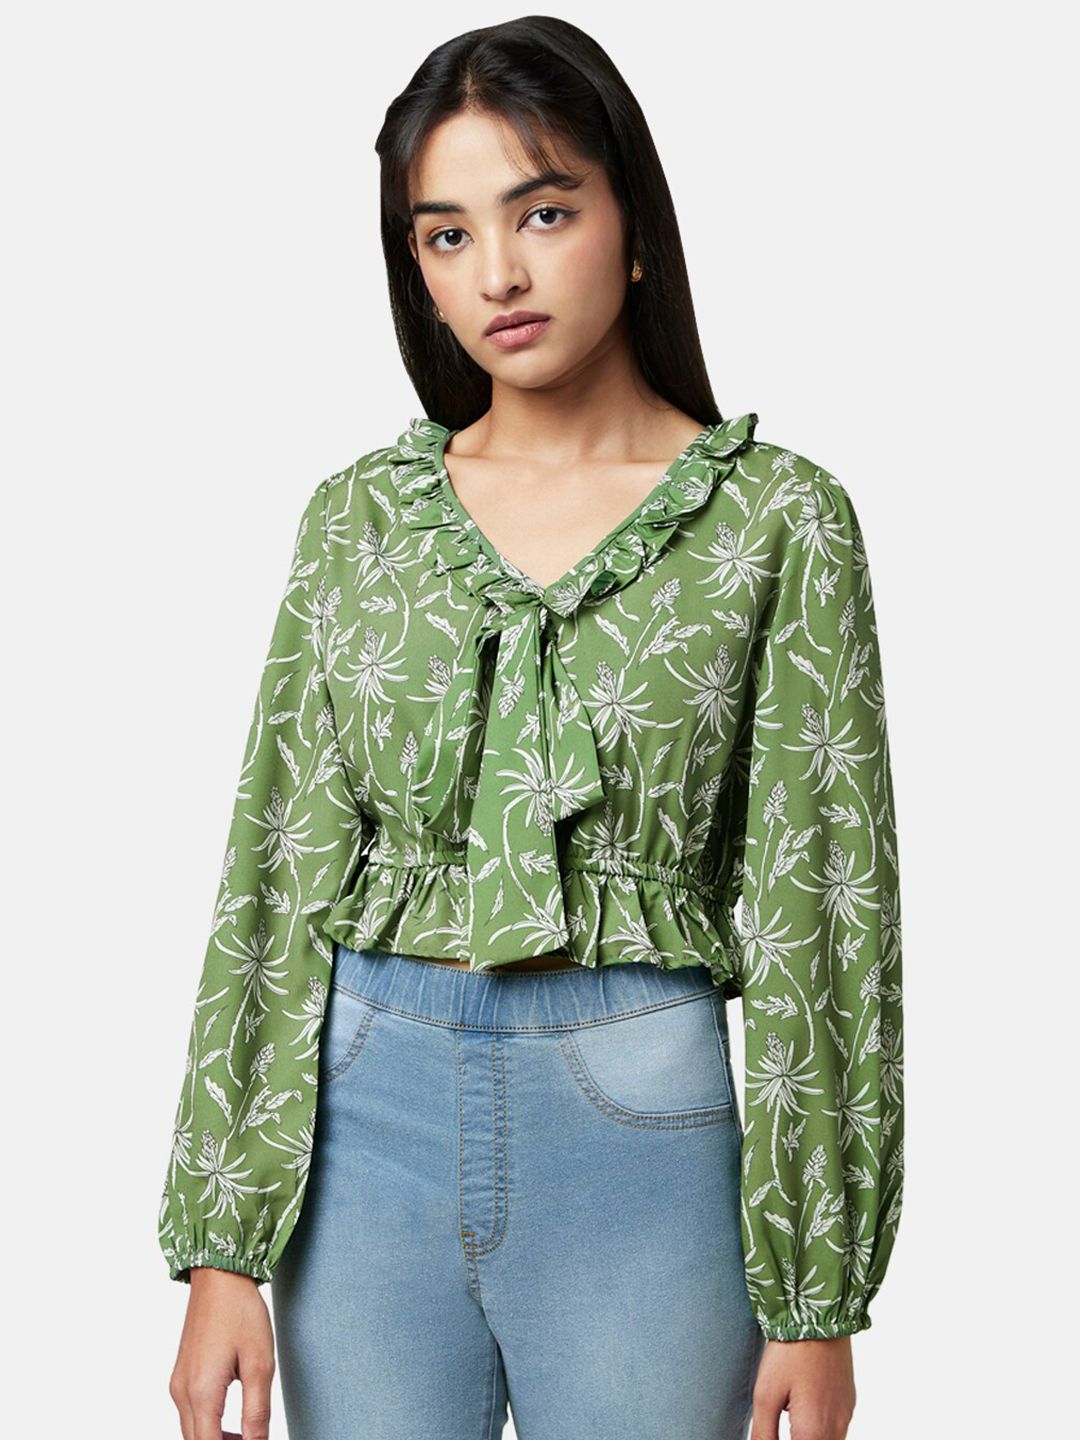 YU by Pantaloons Green Floral Print Ruffles Cinched Waist Crop Top Price in India